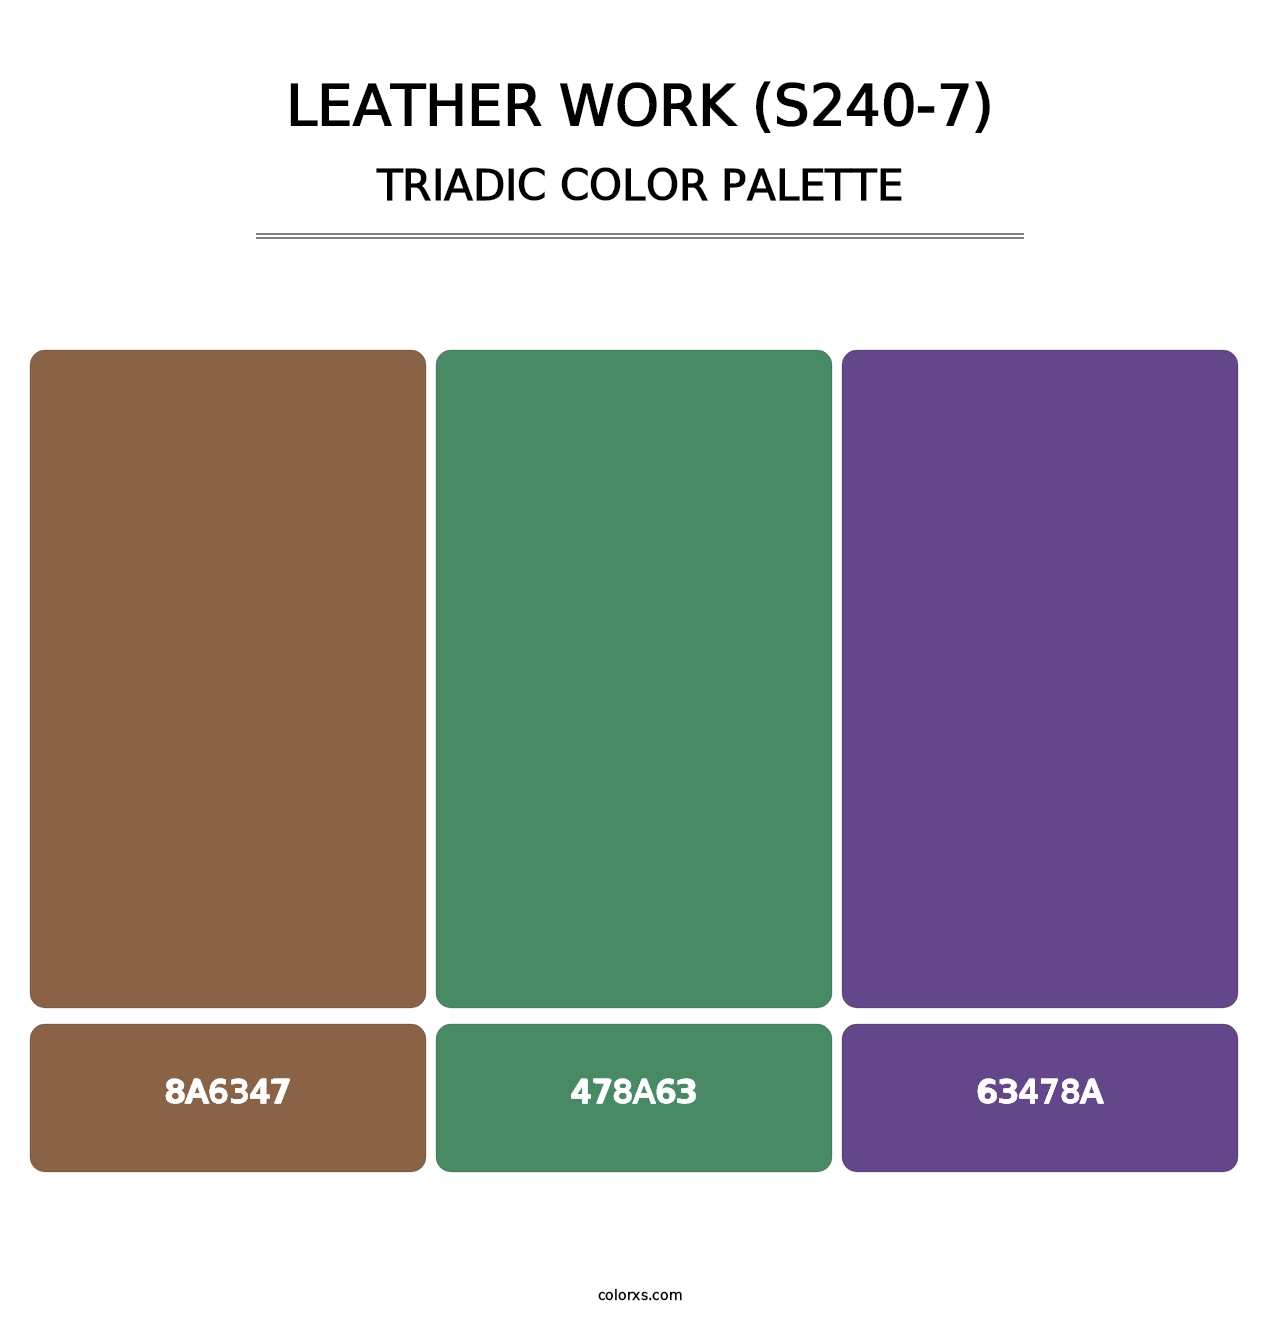 Leather Work (S240-7) - Triadic Color Palette